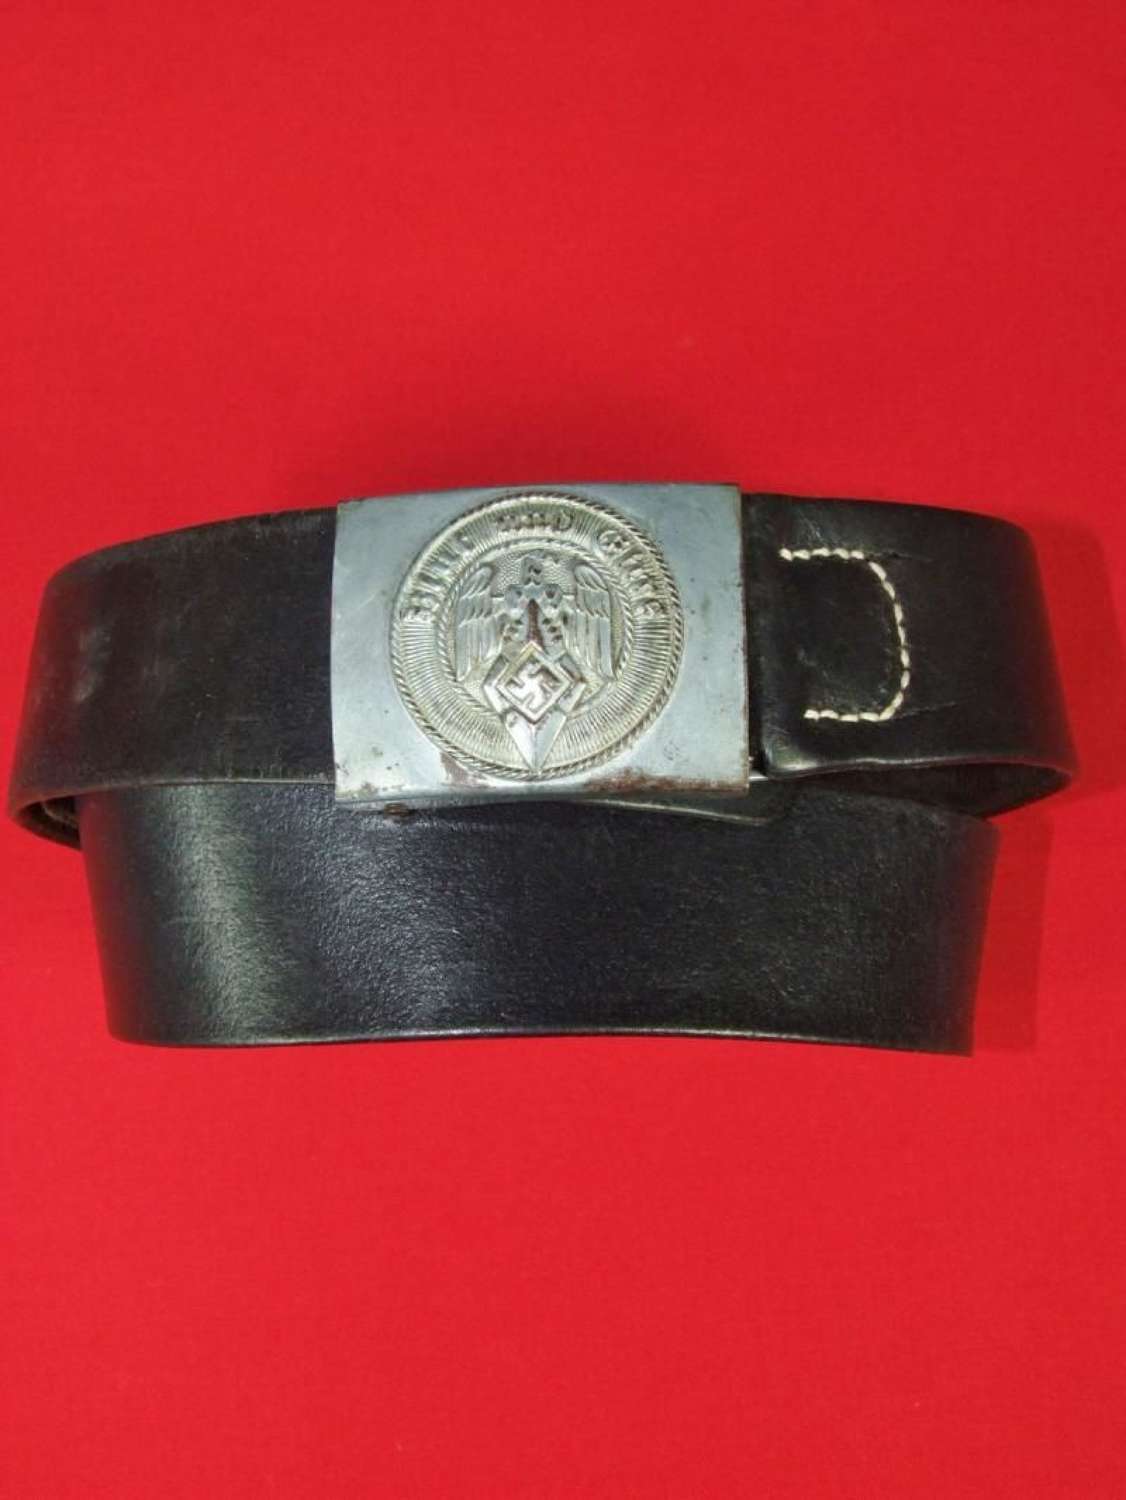 Hitler Youth Belt and Buckle by Julius Kremp